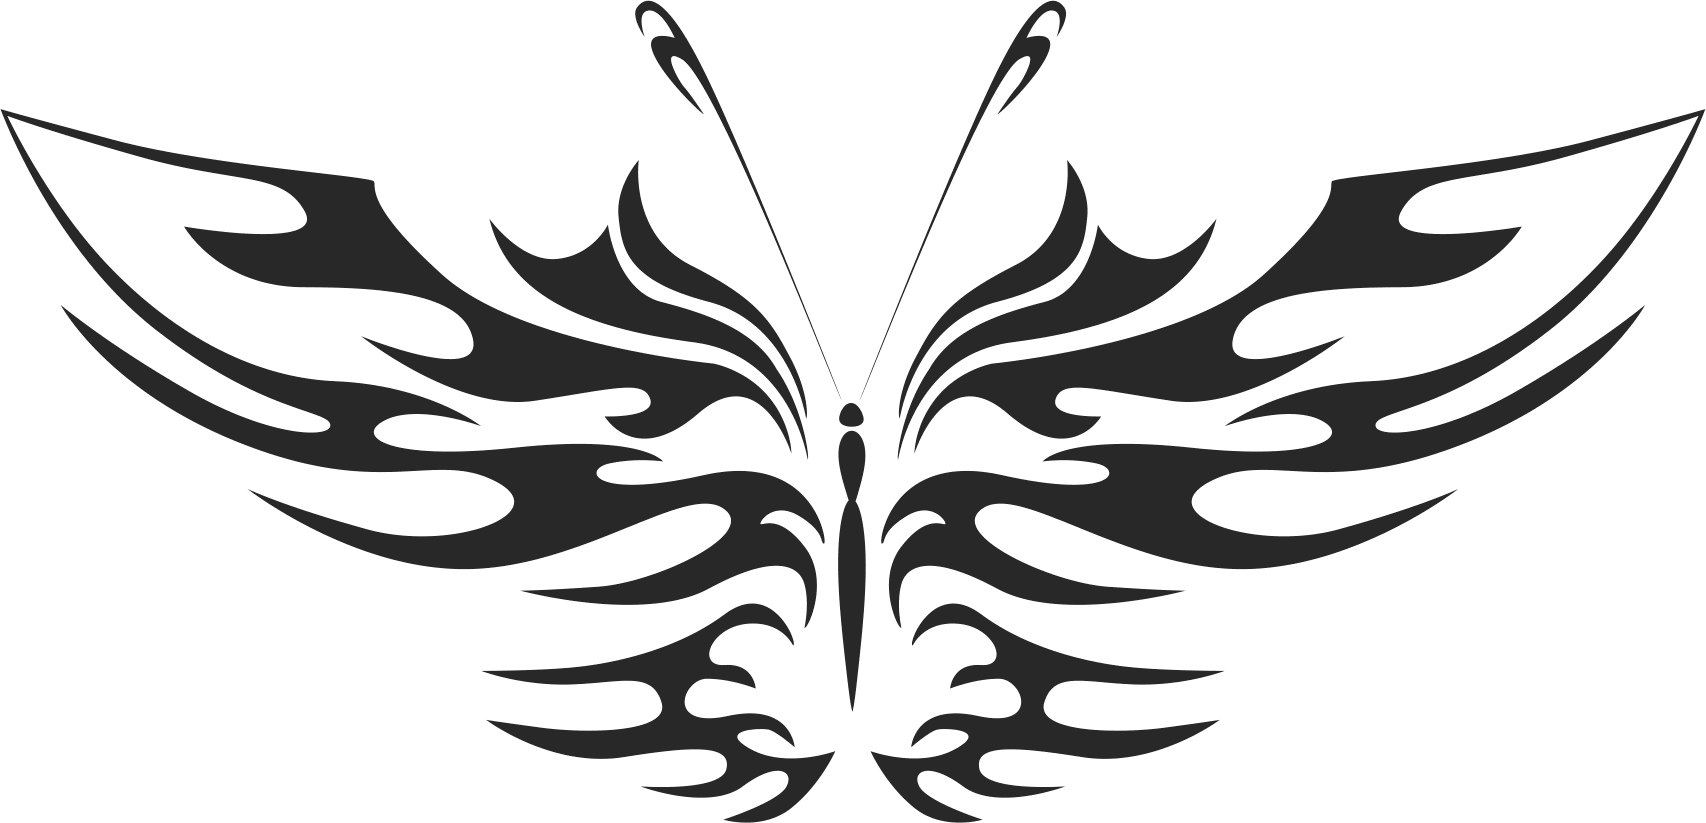 Tattoo Tribal Butterfly Free DXF File